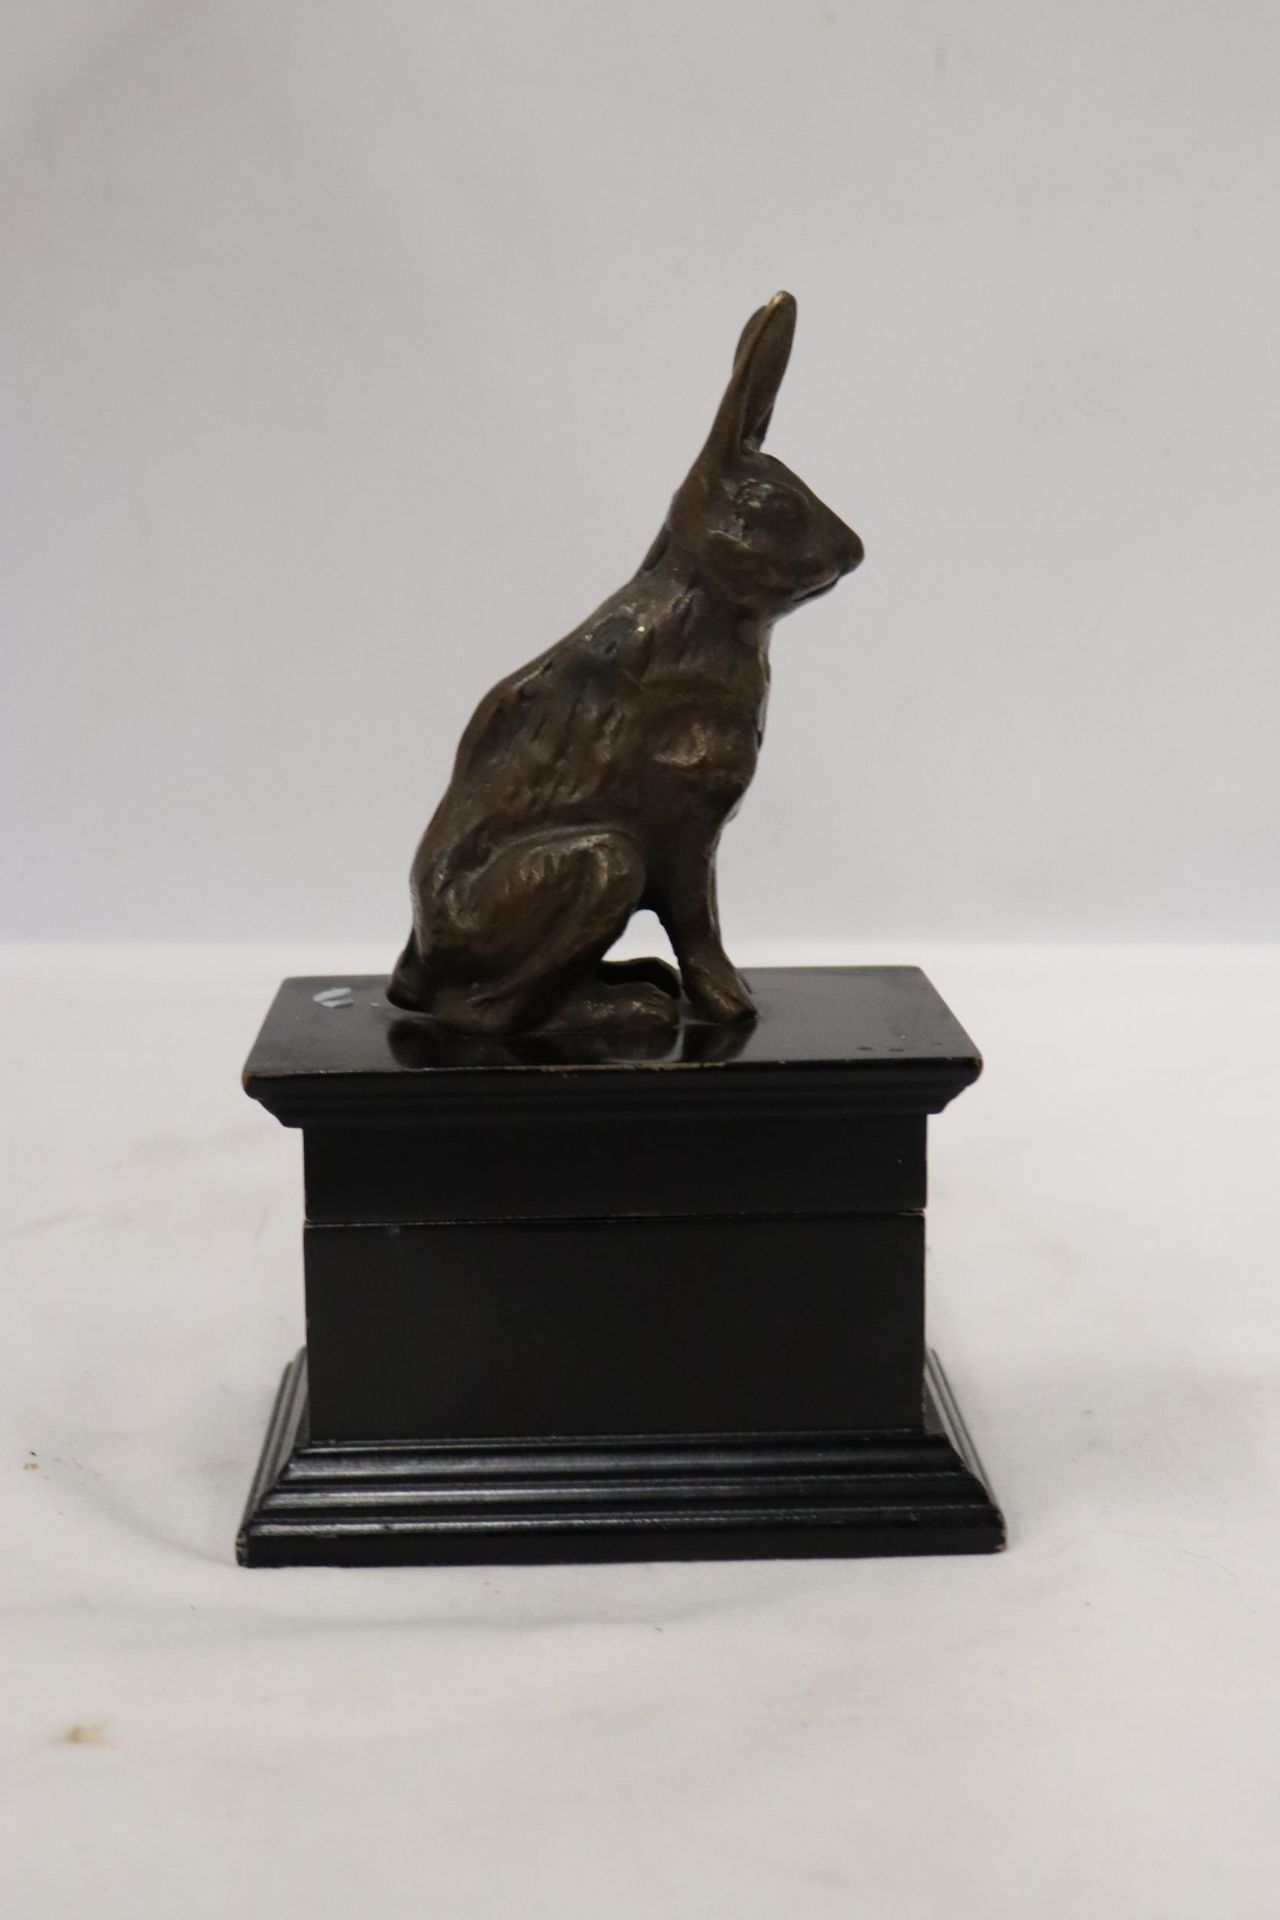 A FIGURE OF A HARE SITTING ON A WOODEN TRINKET BOX - Image 3 of 6